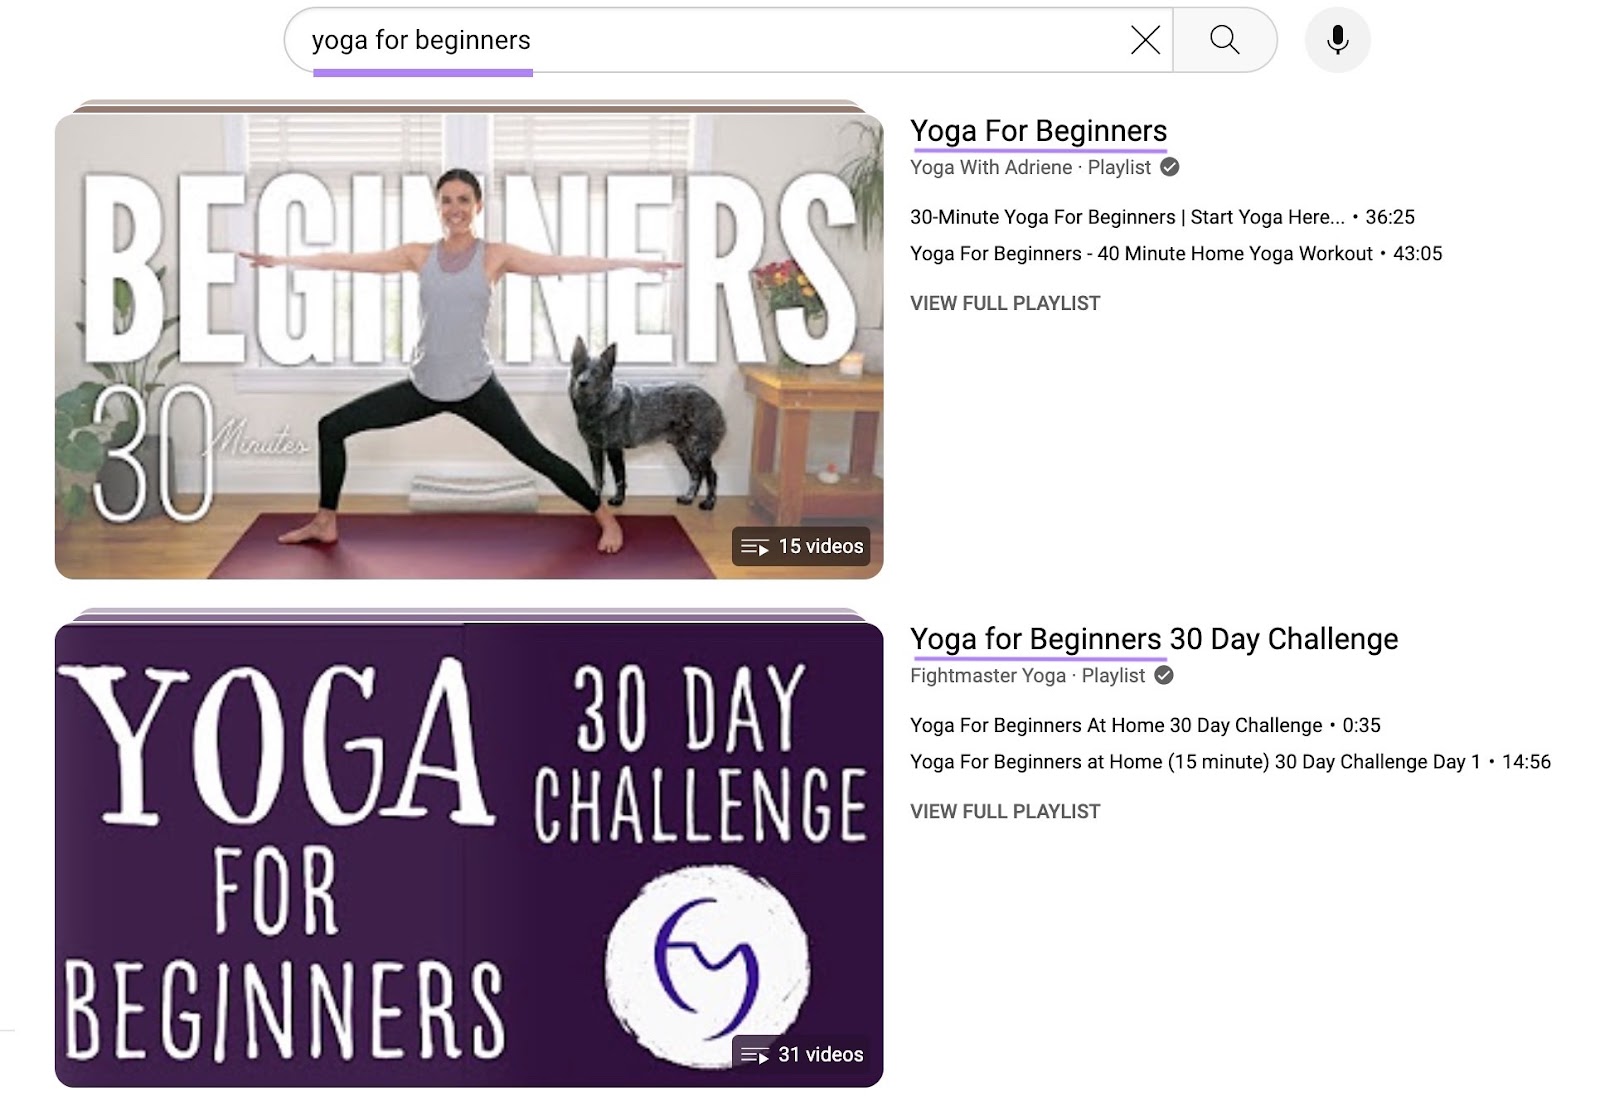 Video playlists for the term 'yoga for beginners' on Youtube with the keywords in the titles highlighted.